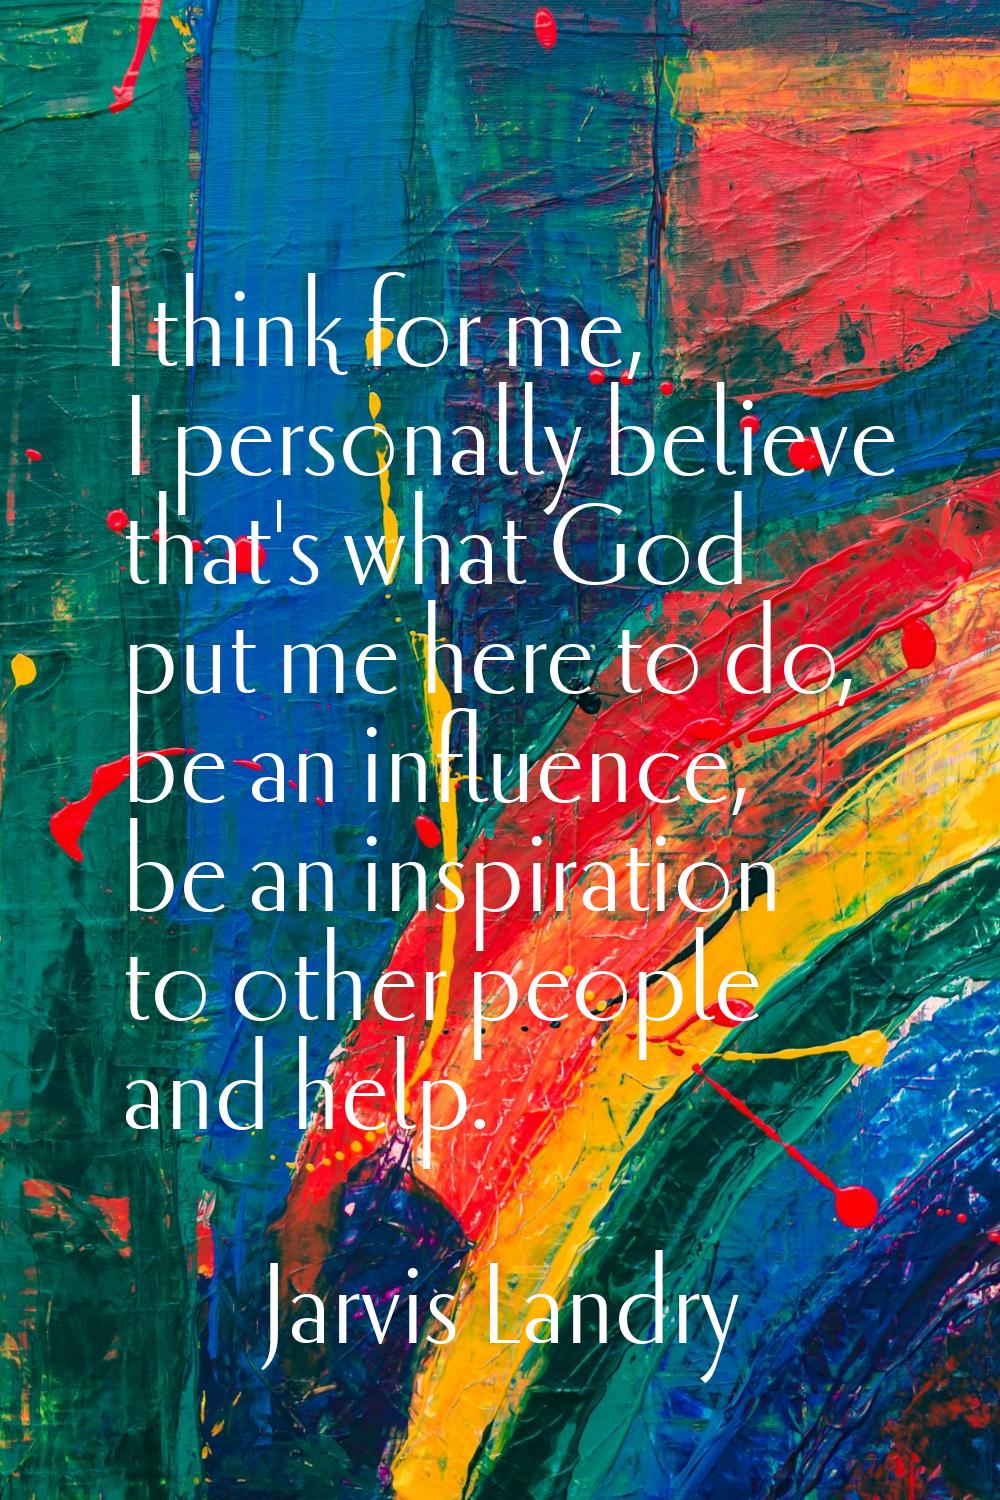 I think for me, I personally believe that's what God put me here to do, be an influence, be an insp